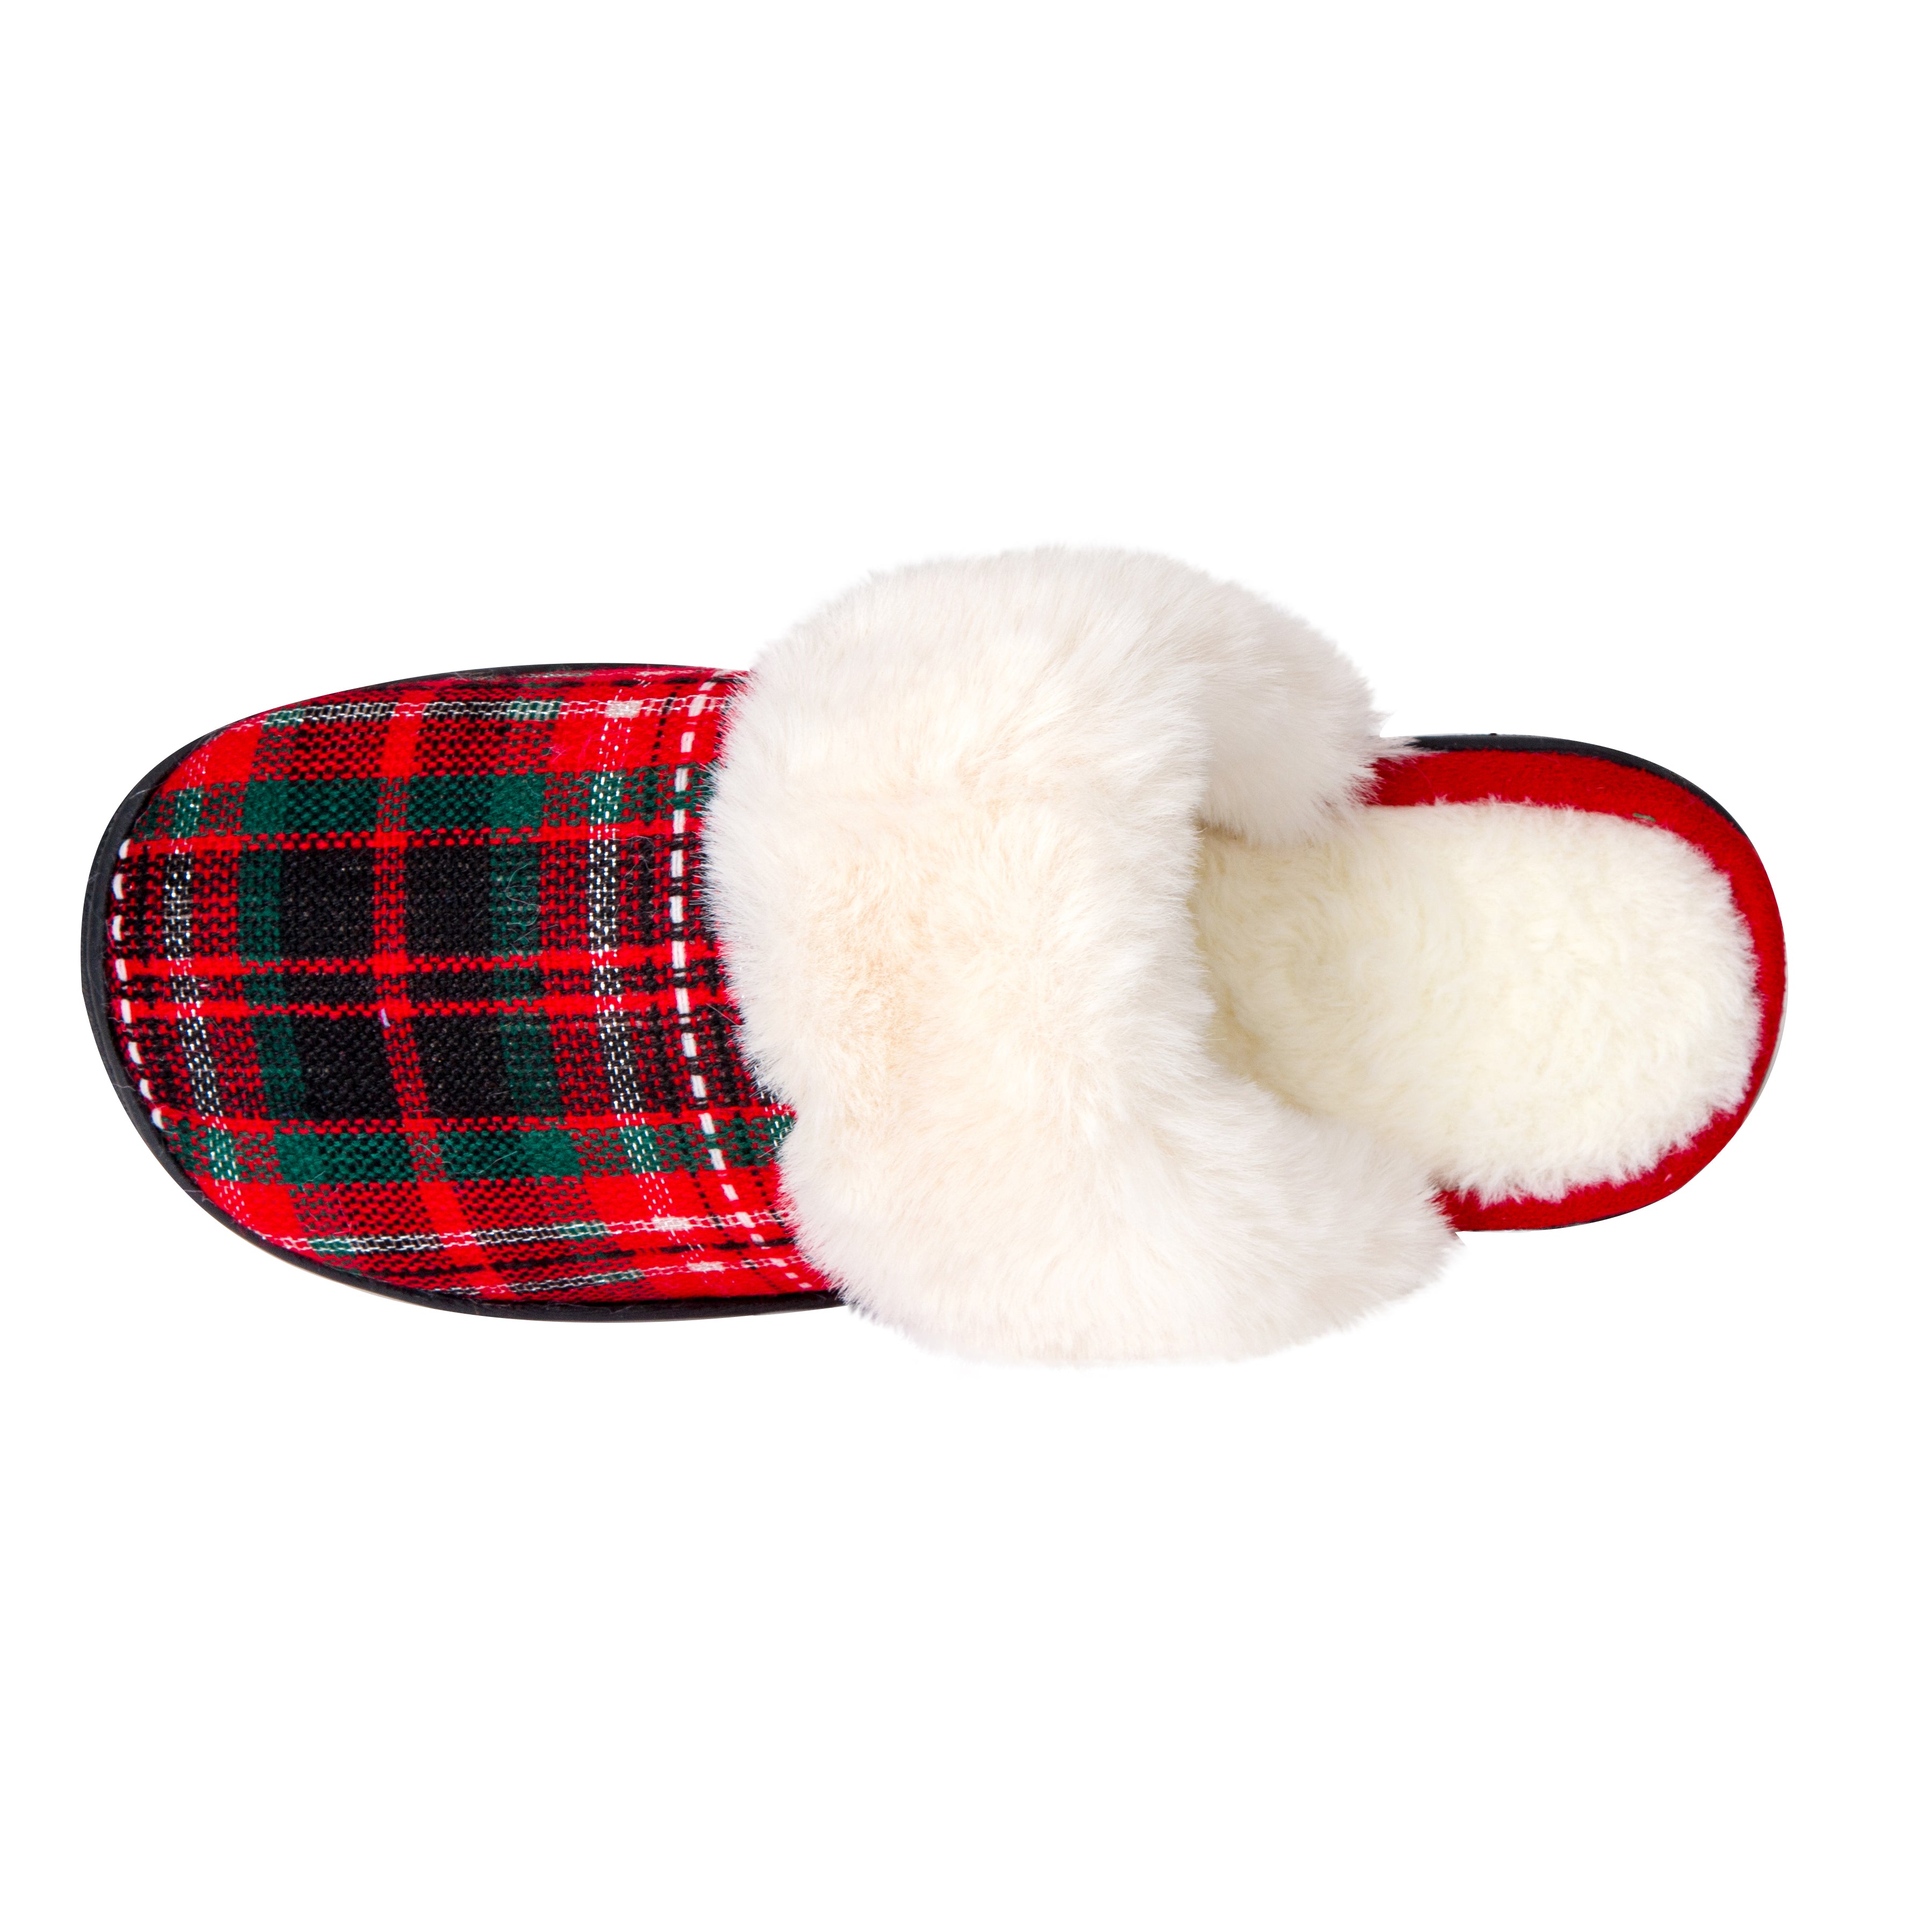 Furry Classical Plaid Slippers for Women Non-Slip Rubber Sole Memory Foam Fuzzy Plush Fluffy House Shoes Outdoor Indoor Christmas Xmas Gifts